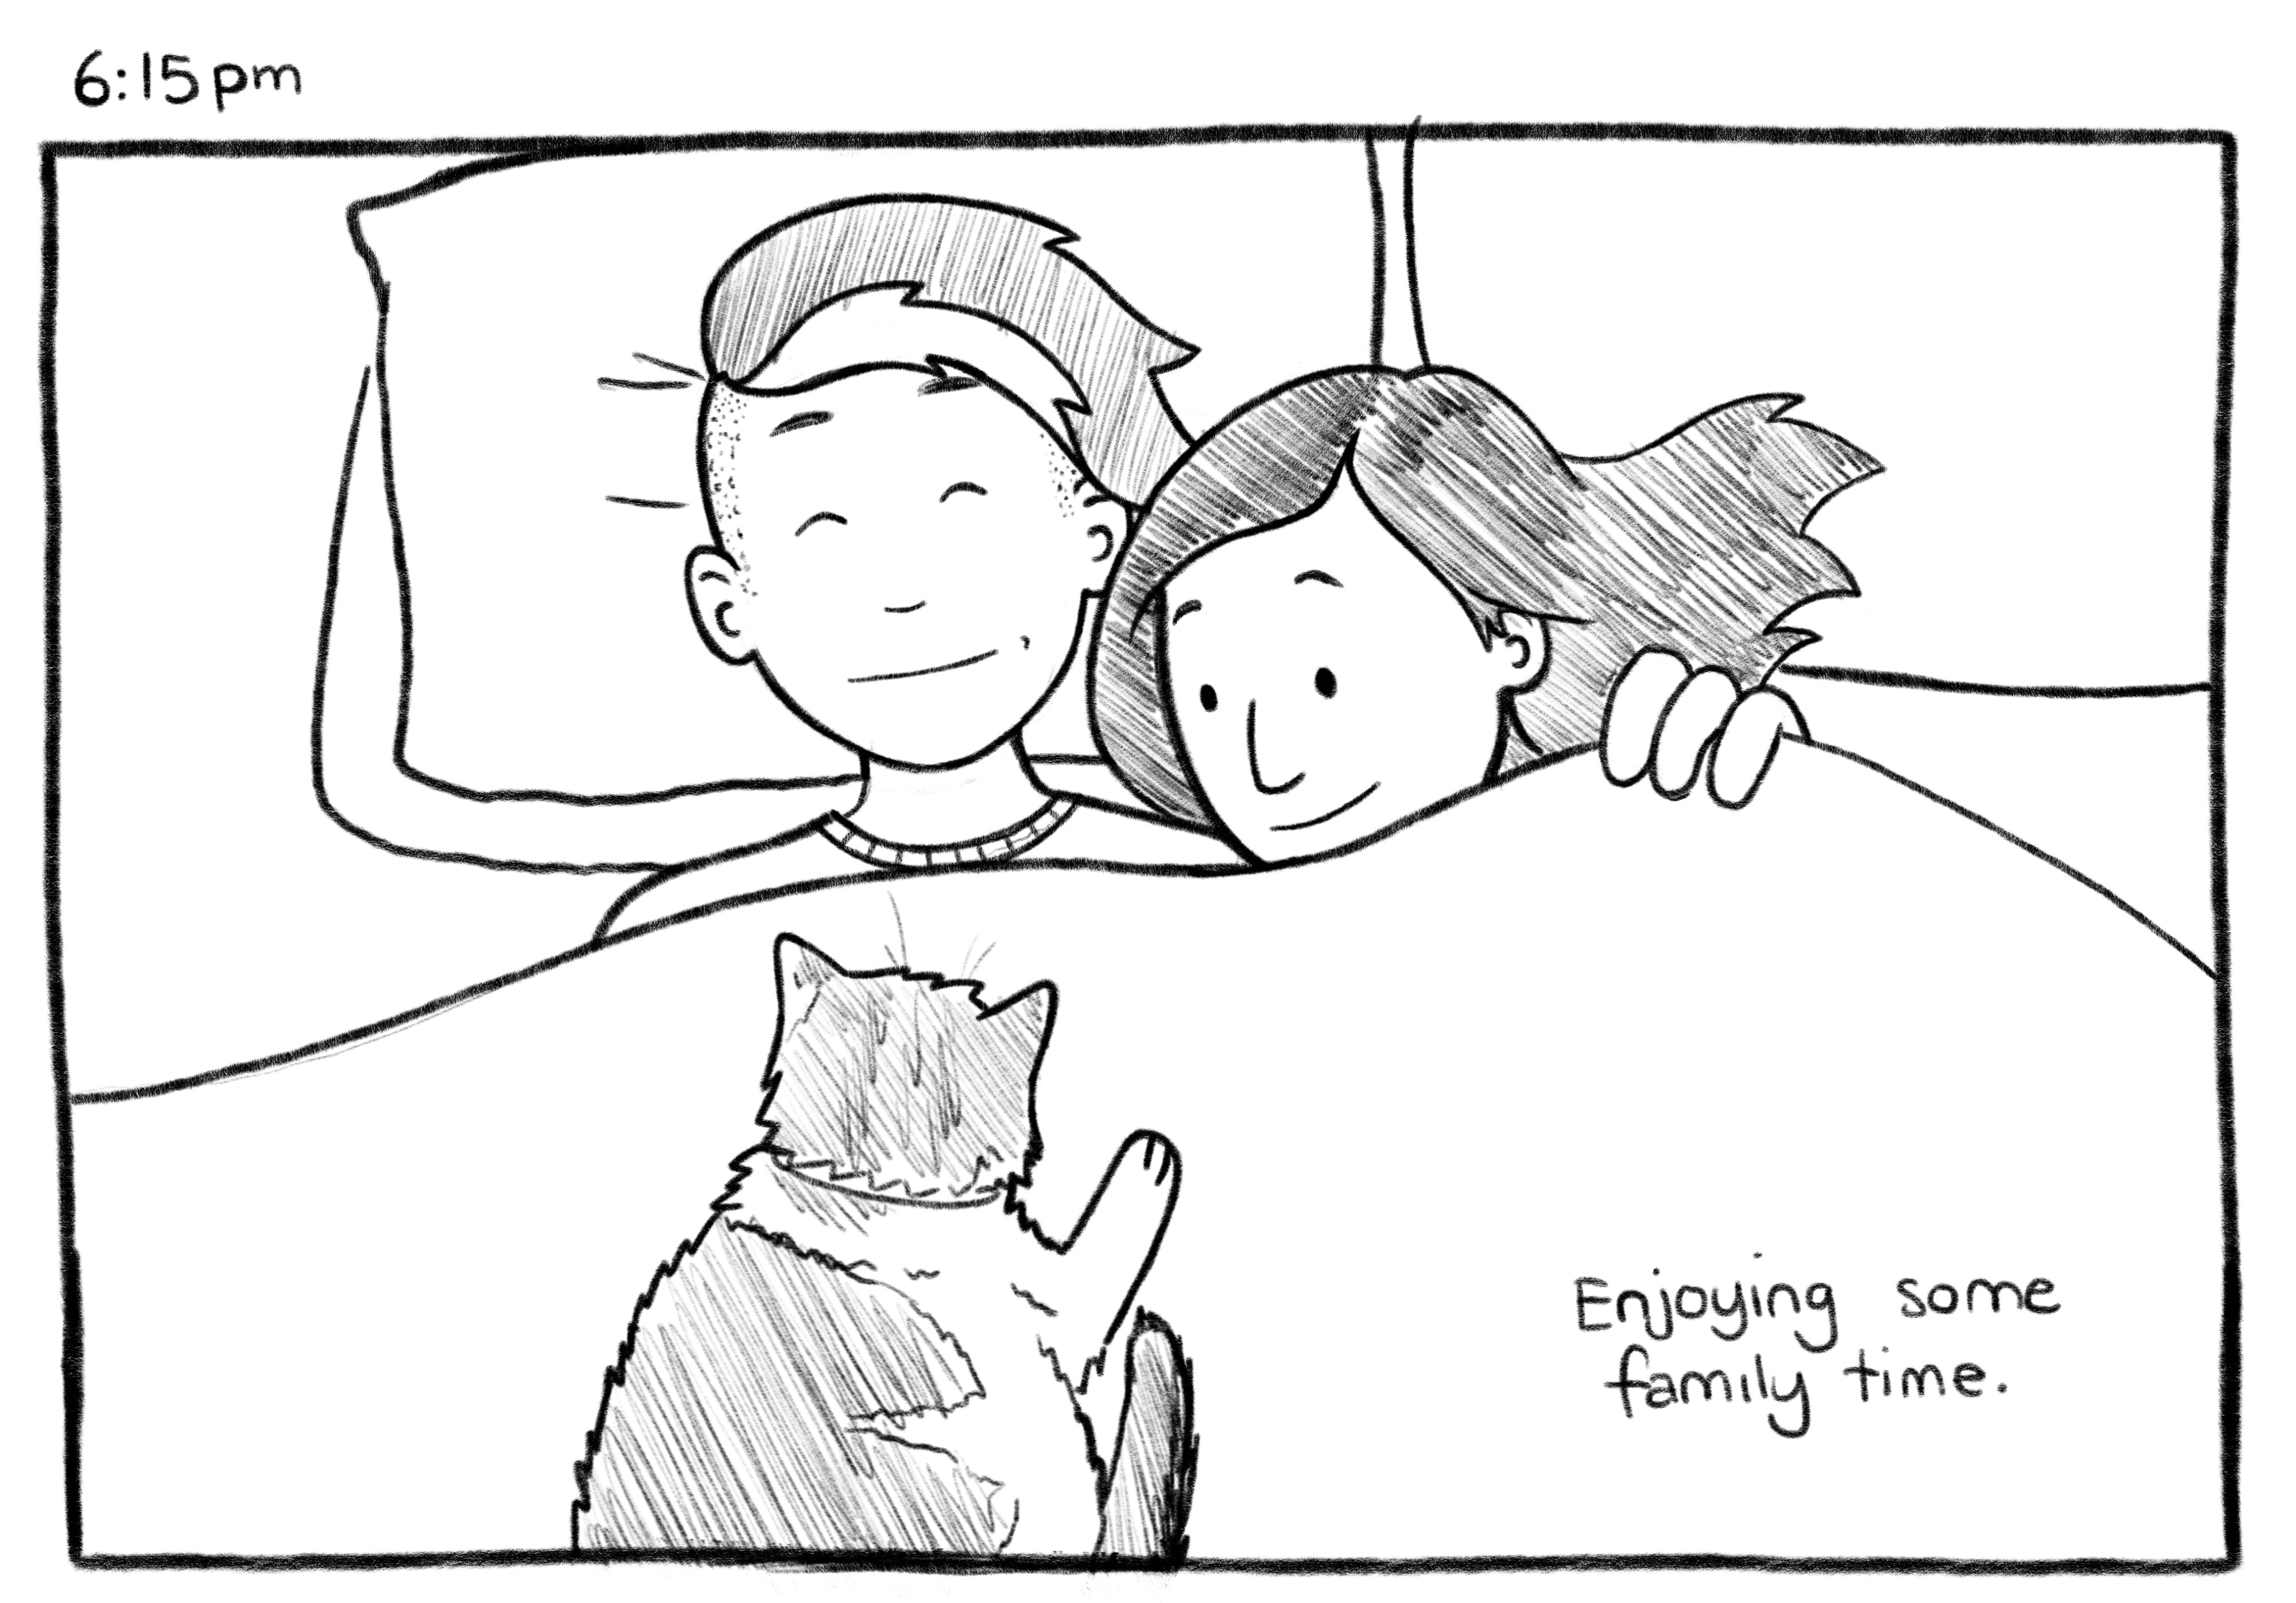 6:15pm; Panel 1: Jelly and Mel are cuddling in bed, with Turbo laying on Jelly's stomach. Jelly V.O.: Enjoying some family time.